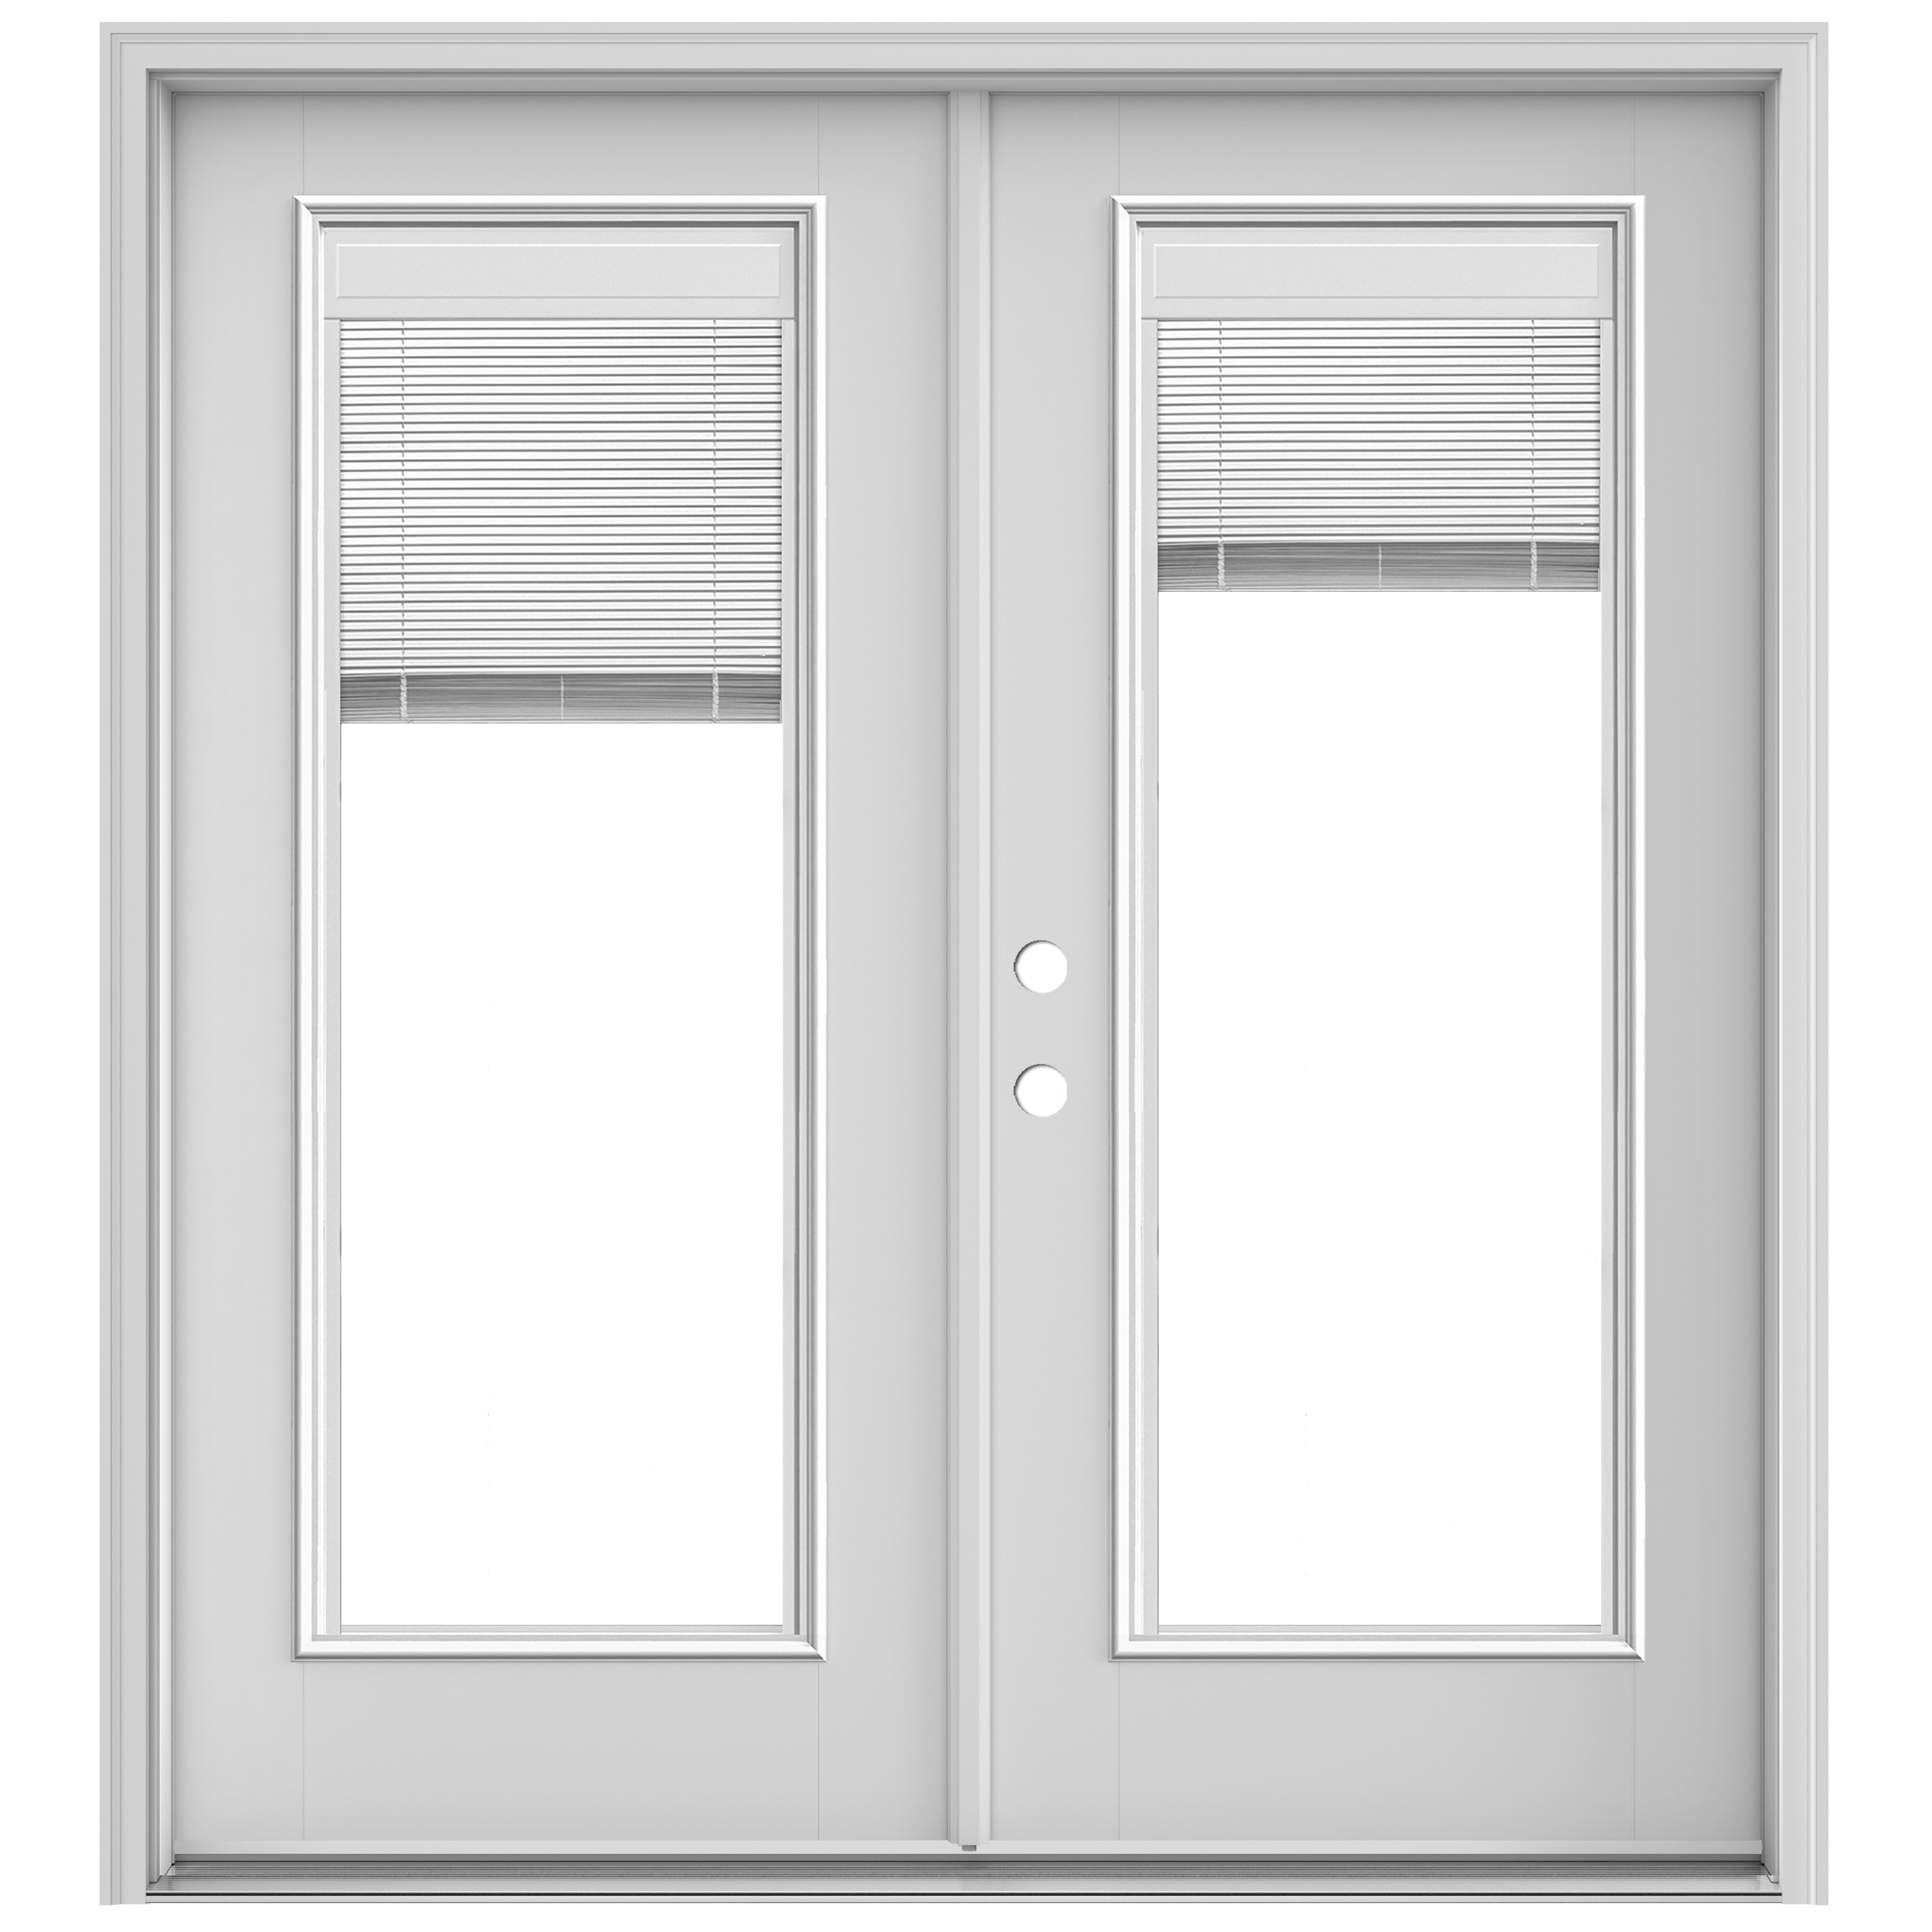 Jeld Wen 72 In X 80 Low E Blinds Between The Glass Primed Fiberglass French Right Hand Inswing Double Patio Door Brickmould Included Doors Department At Lowes Com